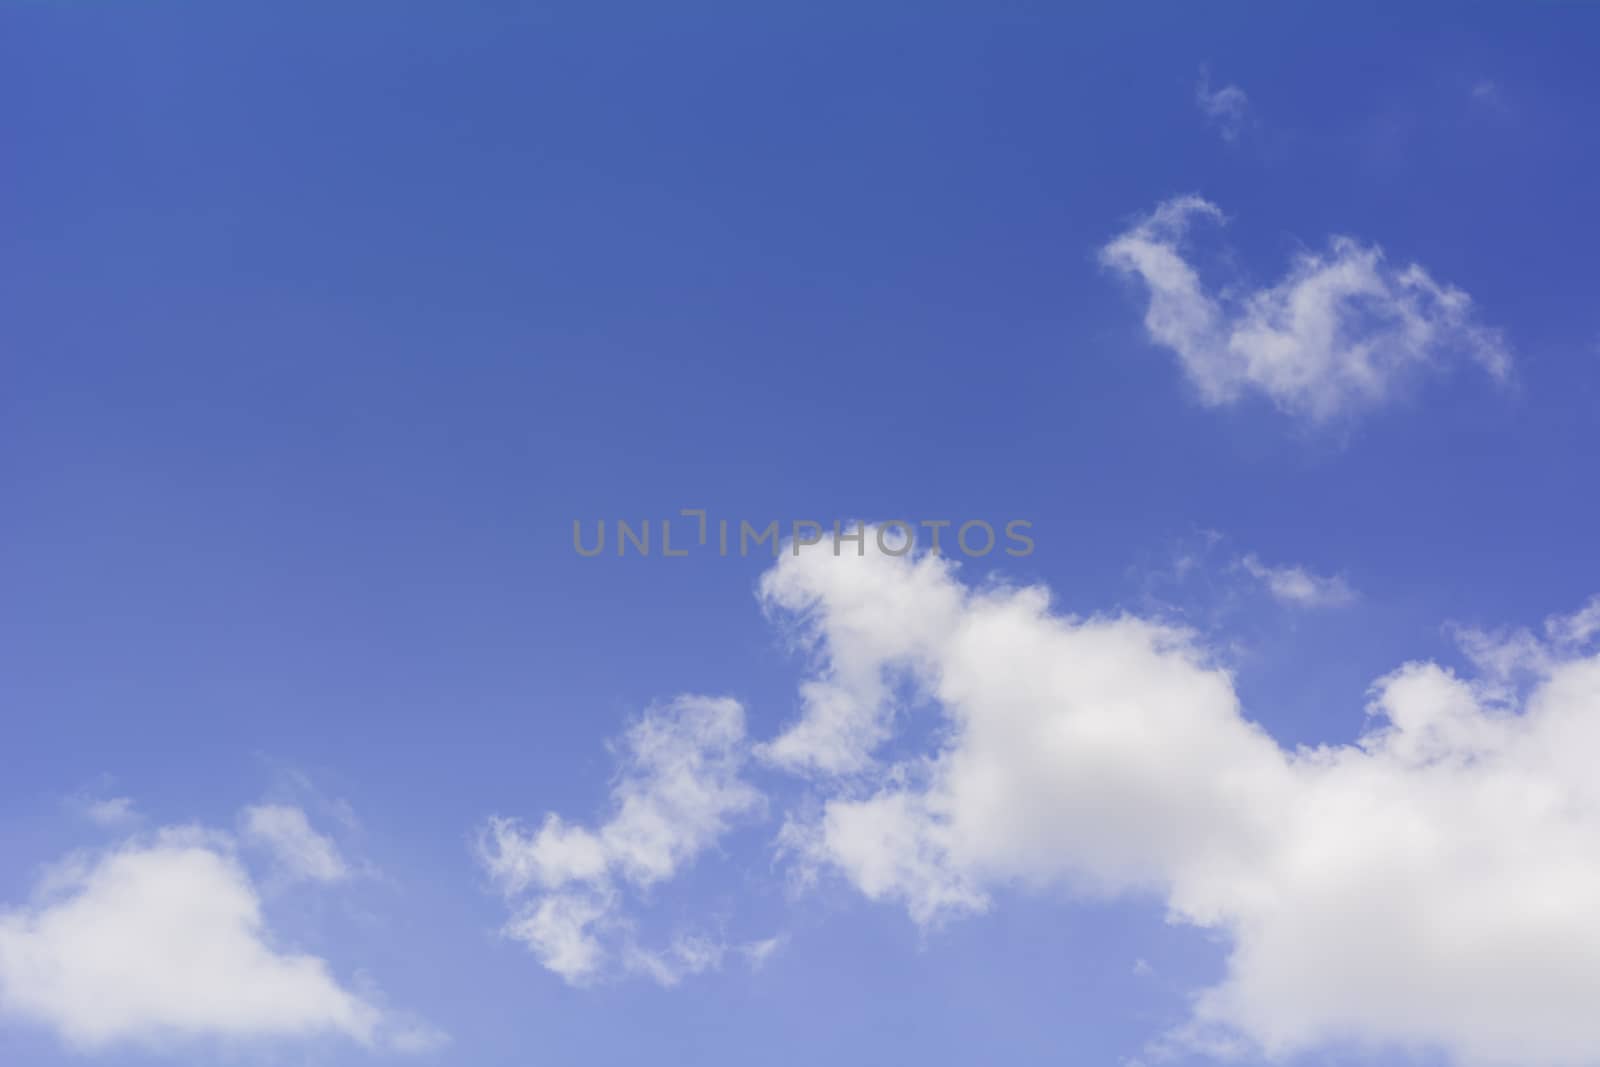 Blue sky with cloud and copy space. Clear weather background.